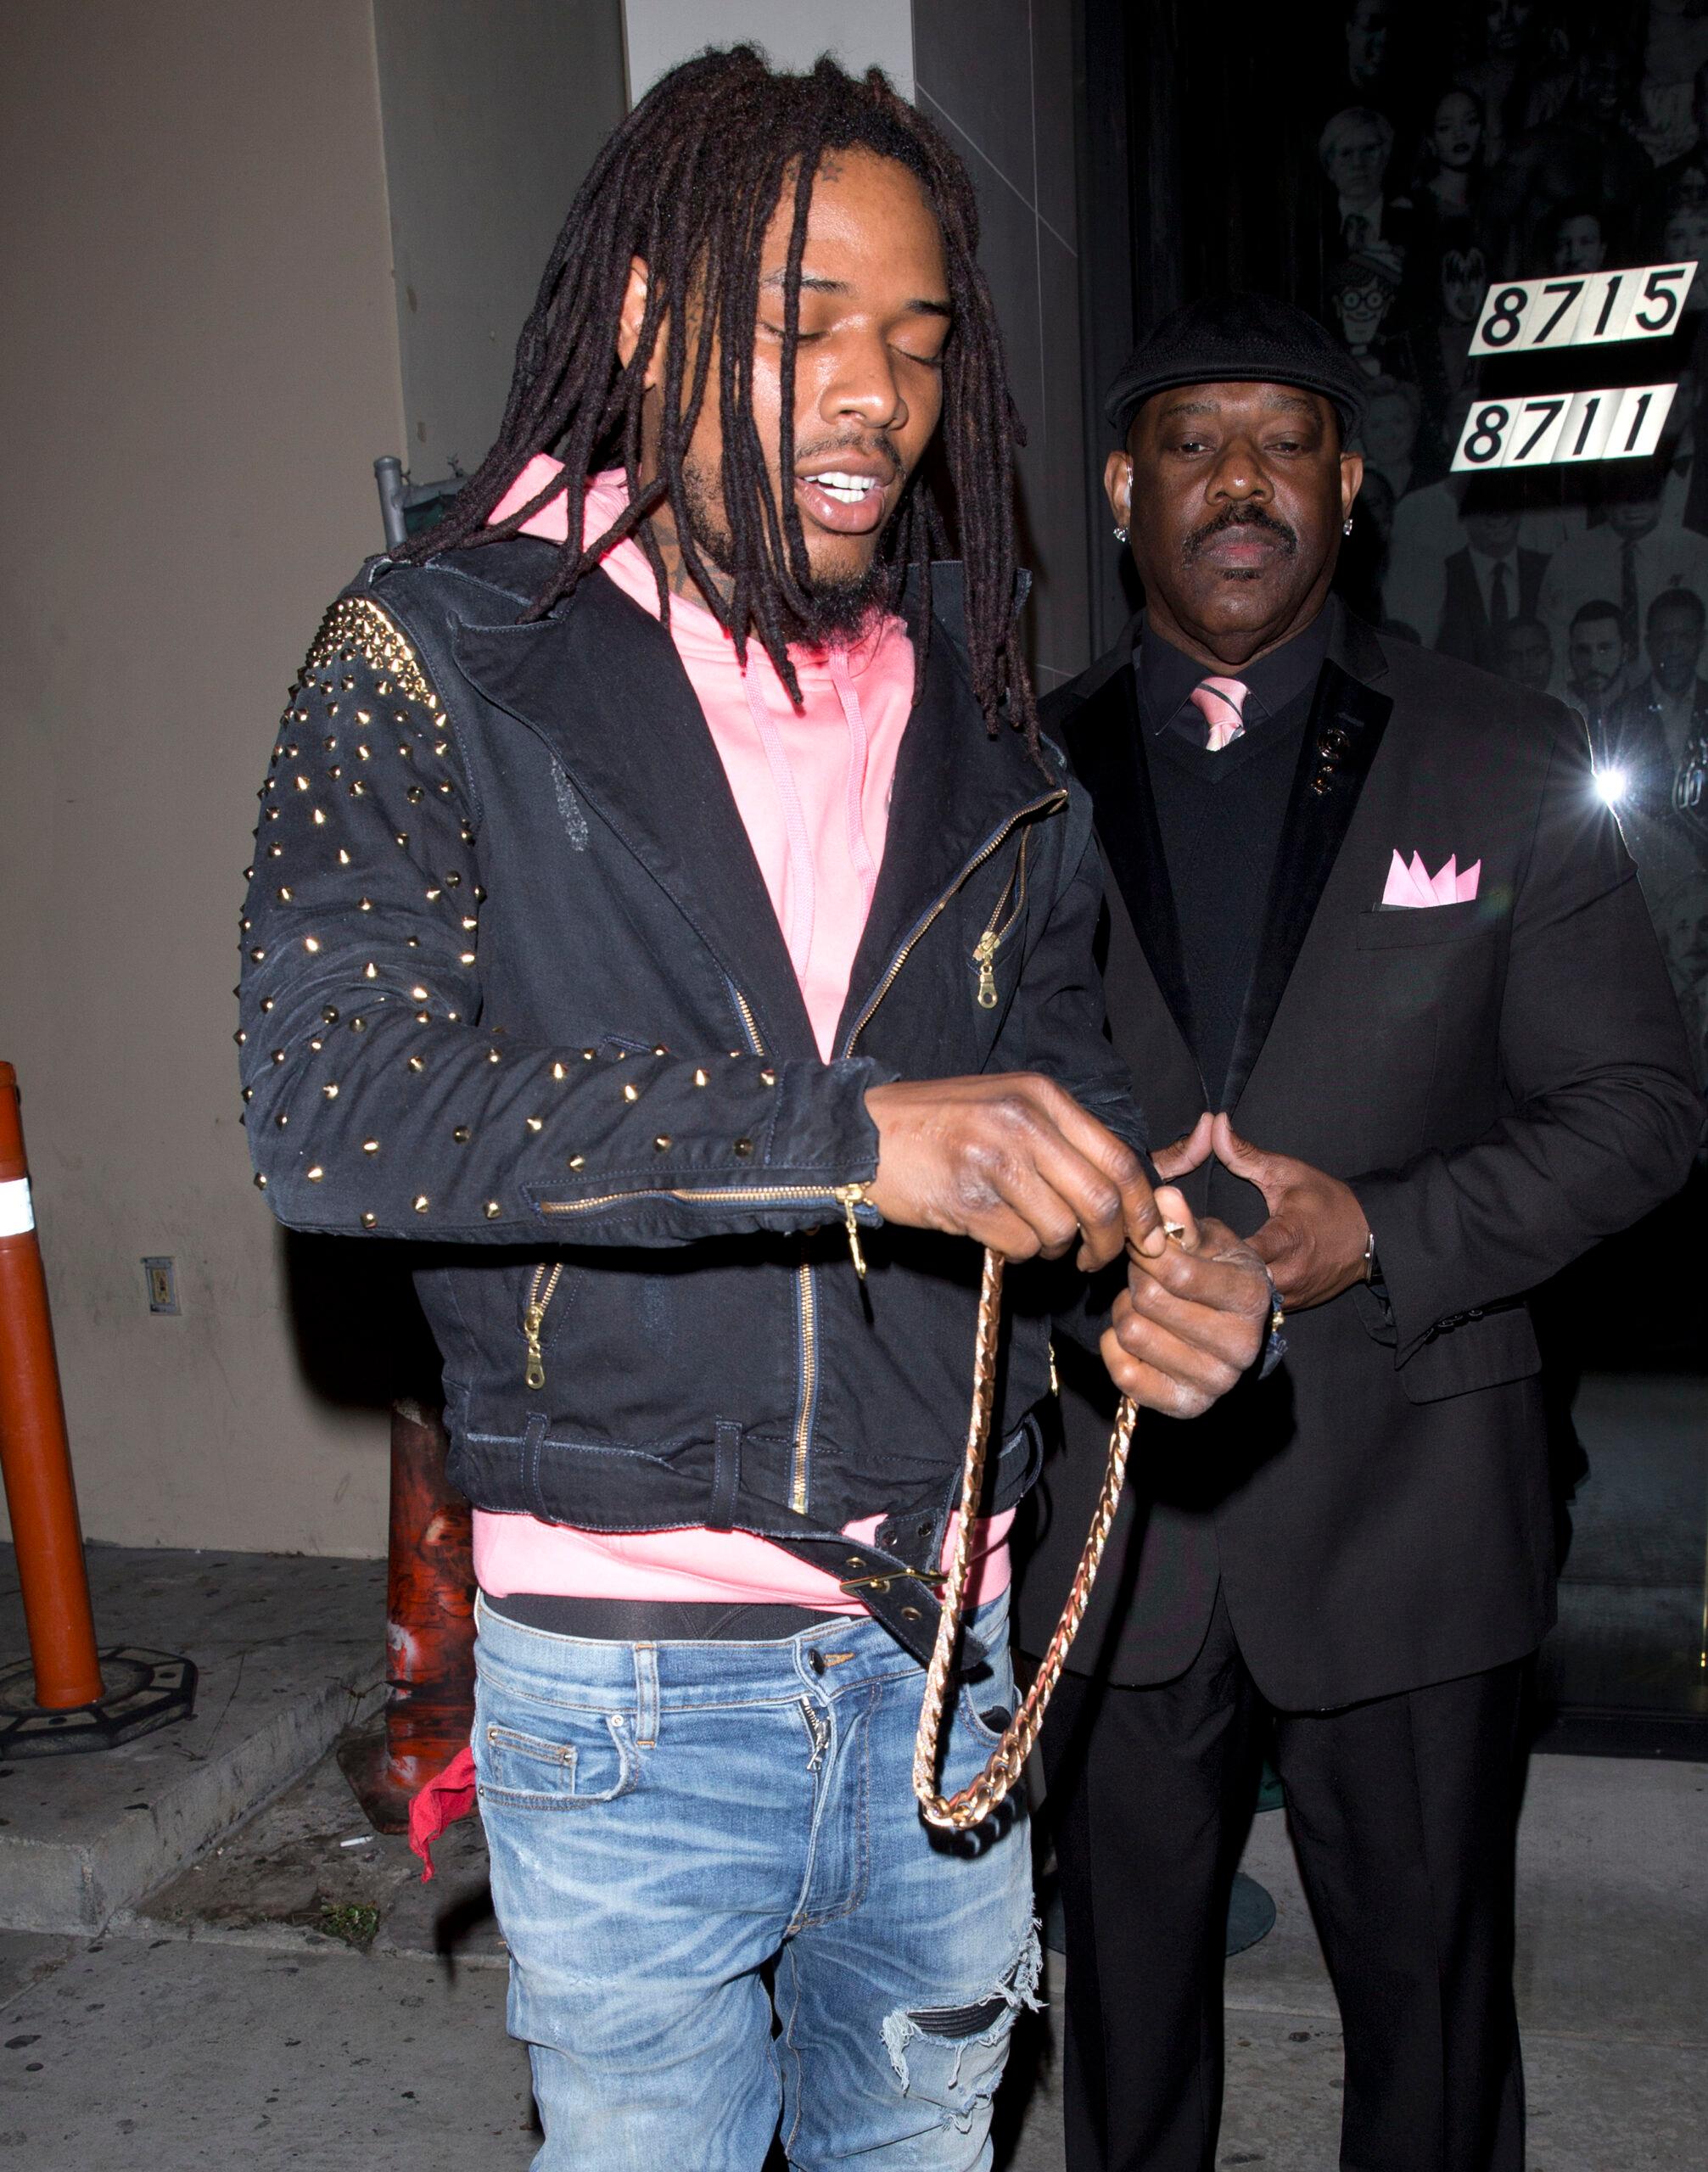 Rapper Fetty Wap was seen showing off his diamond encrusted Gold necklace as he was seen leaving dinner at apos Catch LA apos in West Hollywood CA